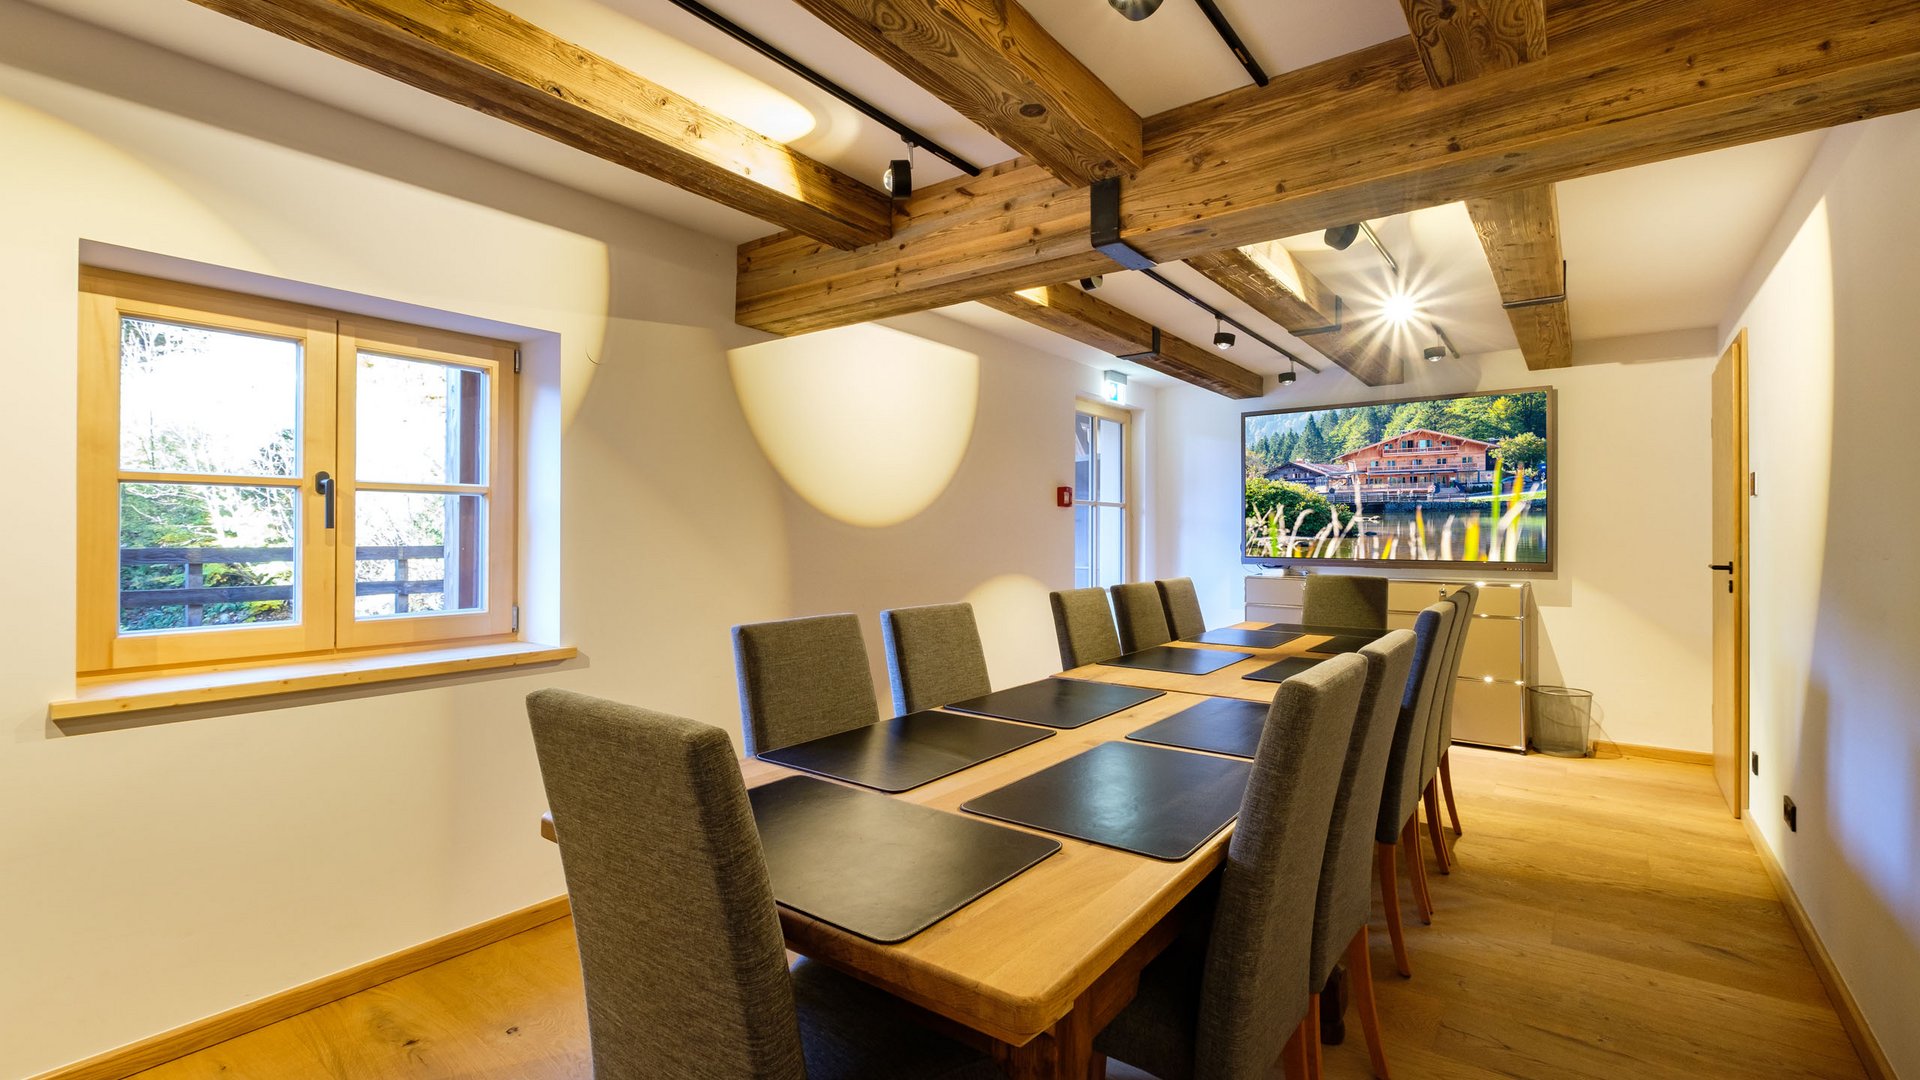 Conference rooms of our seminar hotel in Upper Bavaria